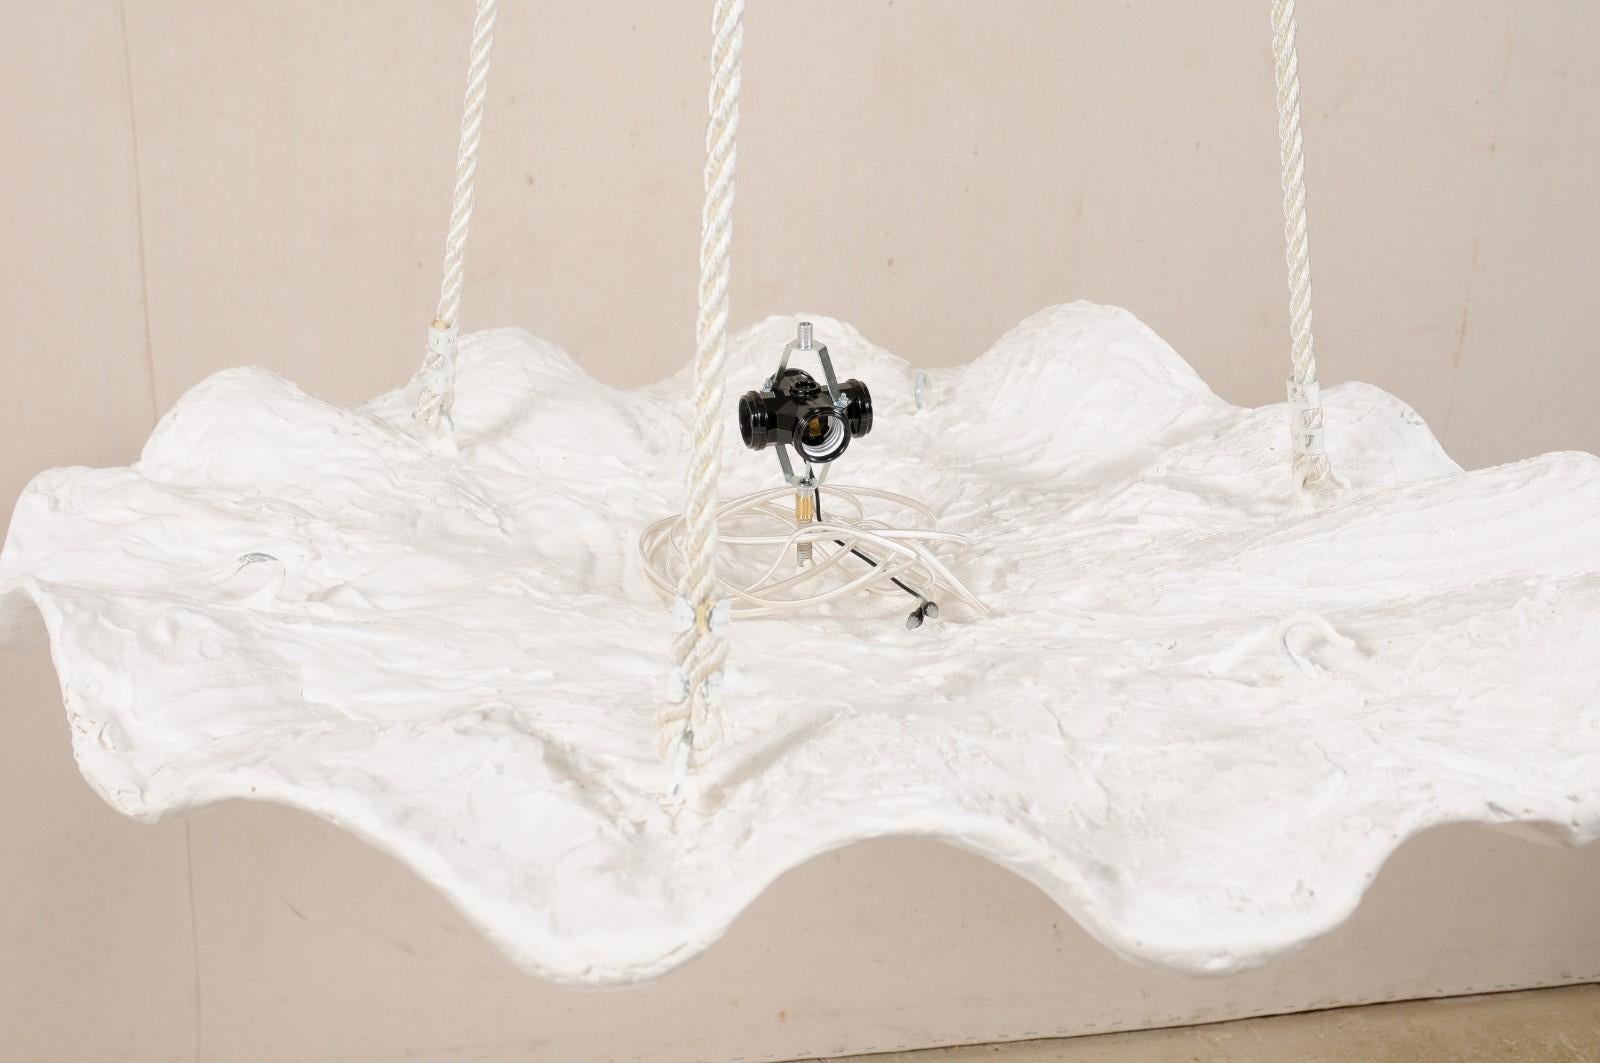 Rope Large Midcentury Inspired Artisan Made Suspended Light Fixture, White Color